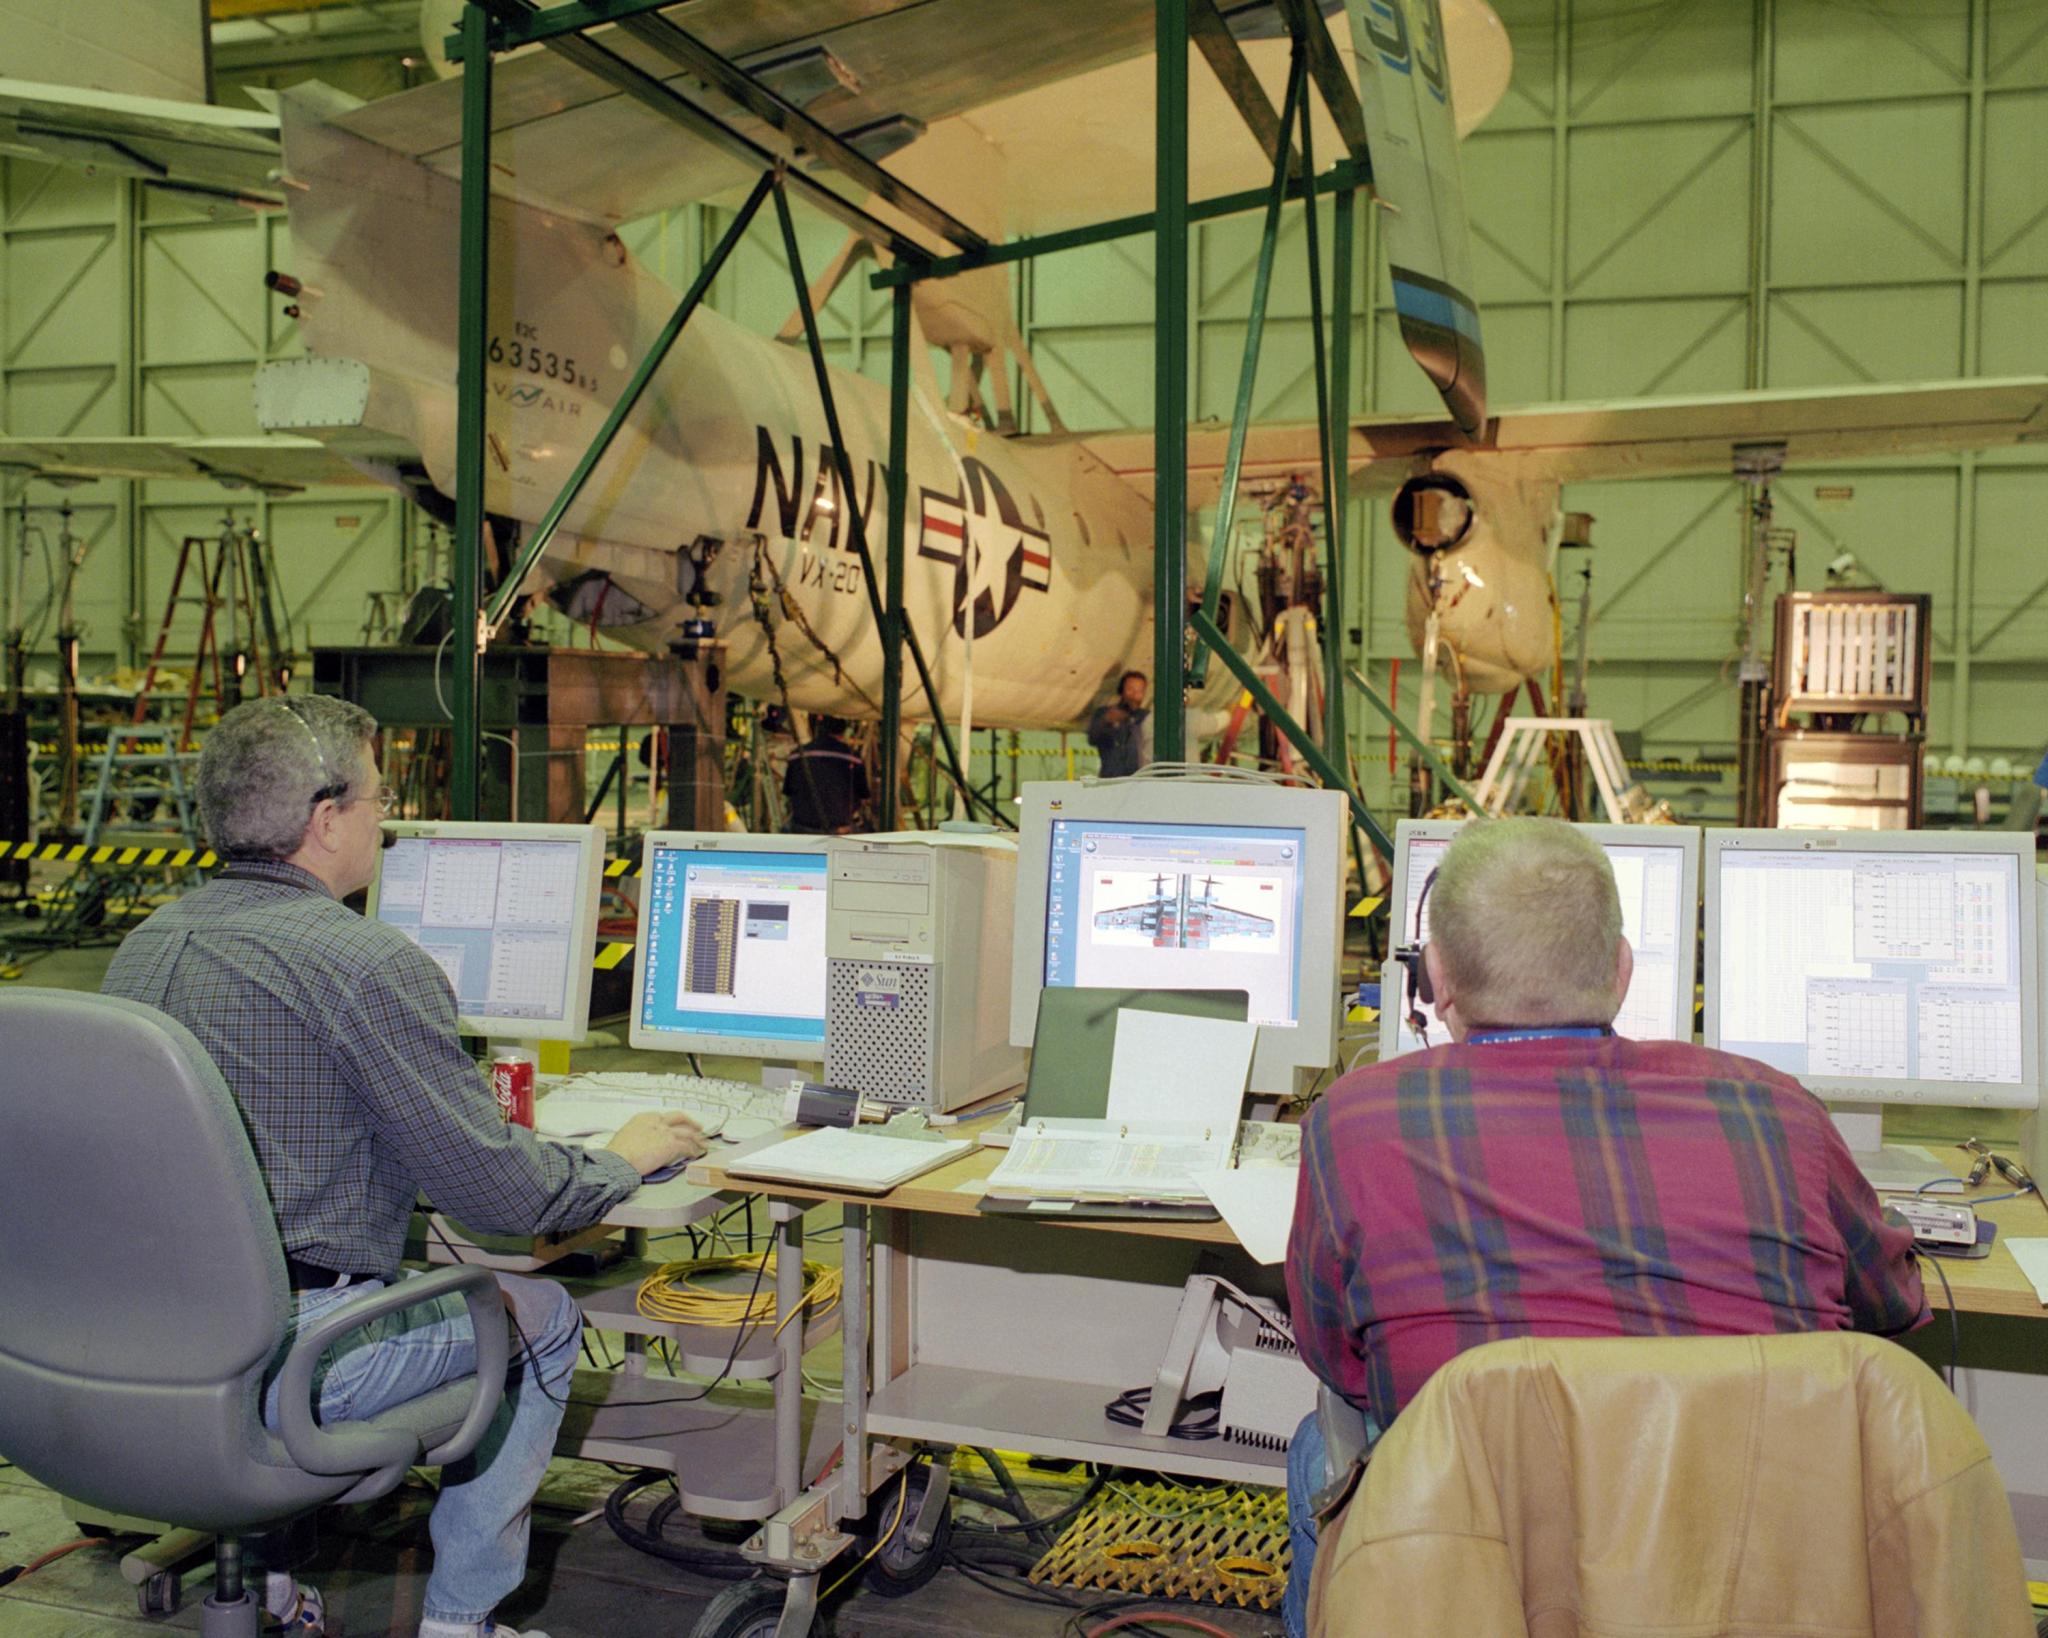 Two men sit at computers while testing an airplane in the background